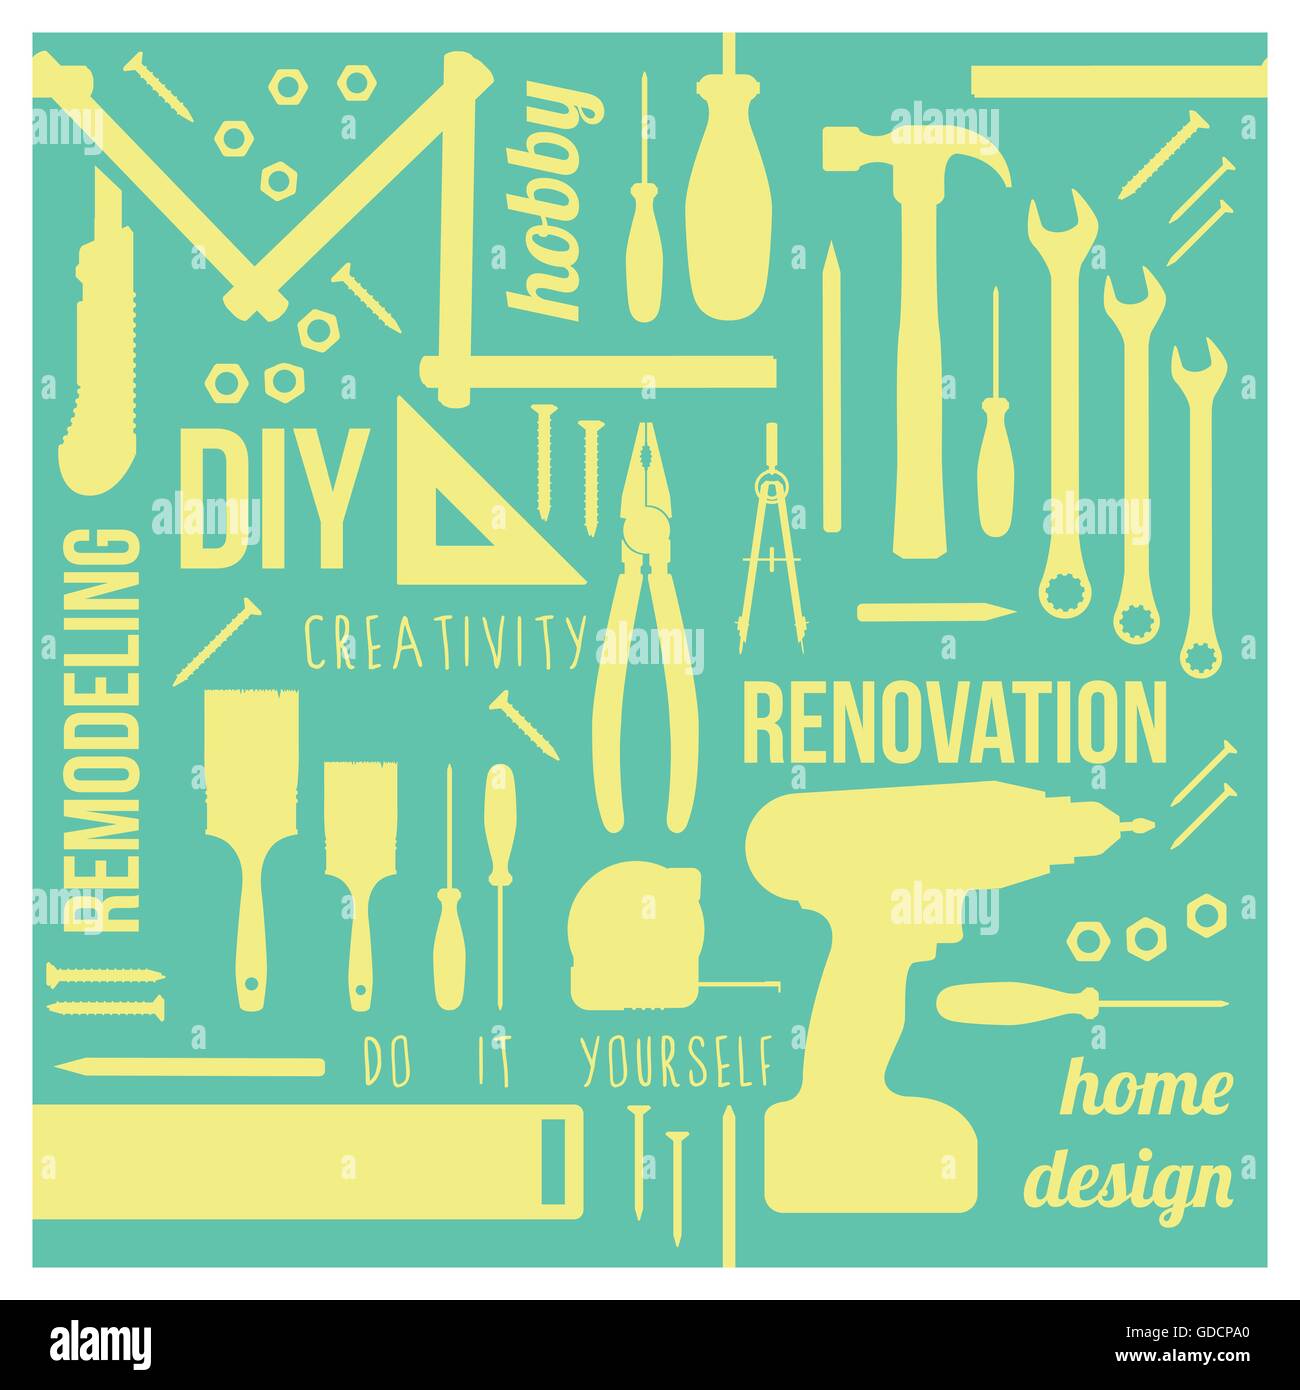 DIY and home renovation tools silhouettes with words and concepts in a square frame Stock Vector